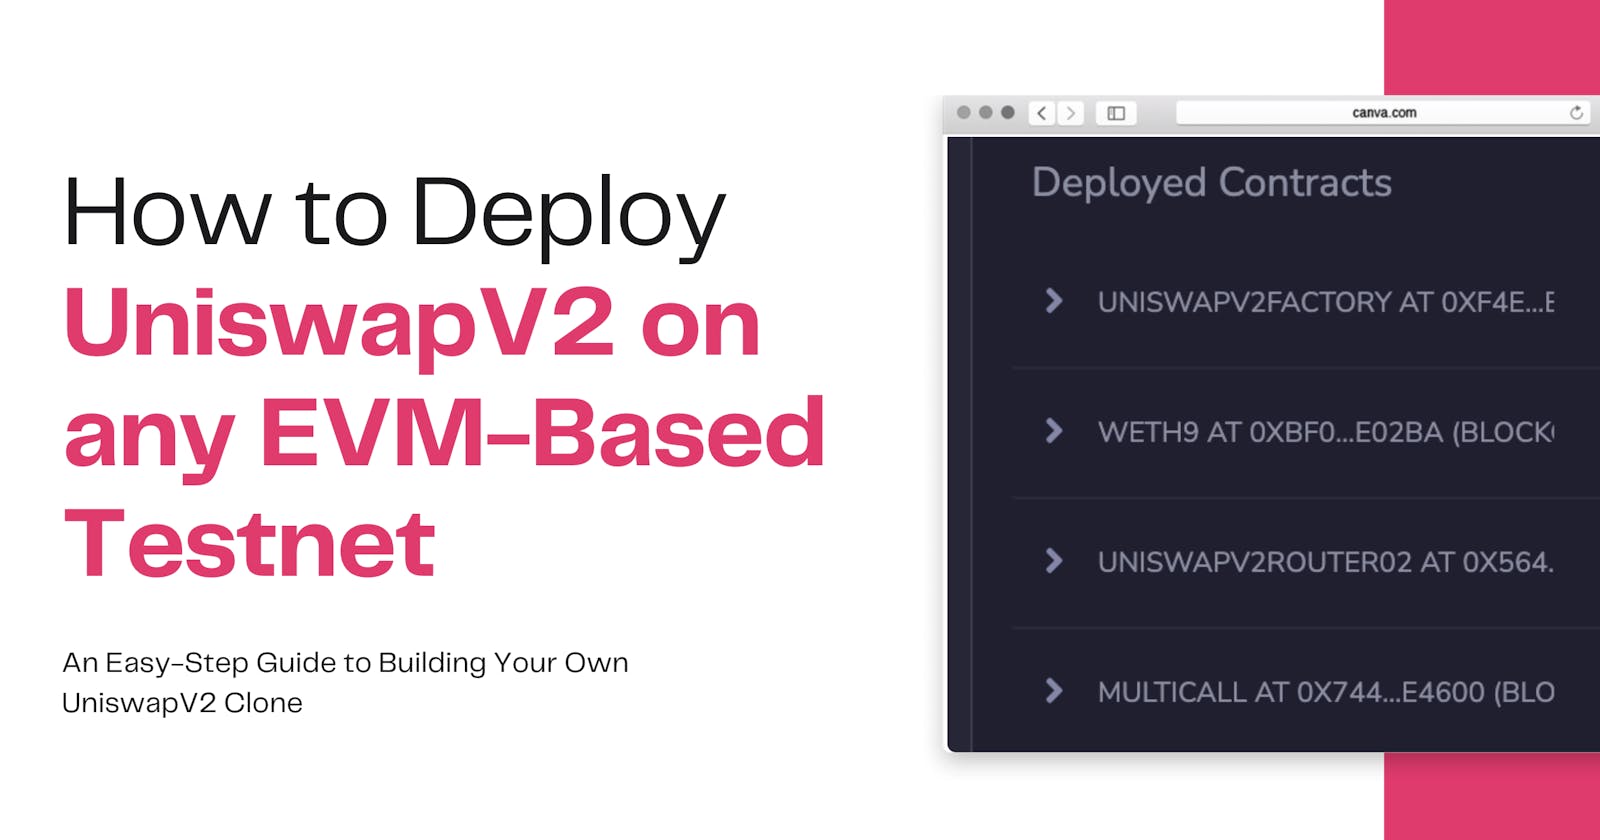 How to Deploy Uniswapv2 Smart Contracts on any EVM-Based Testnet